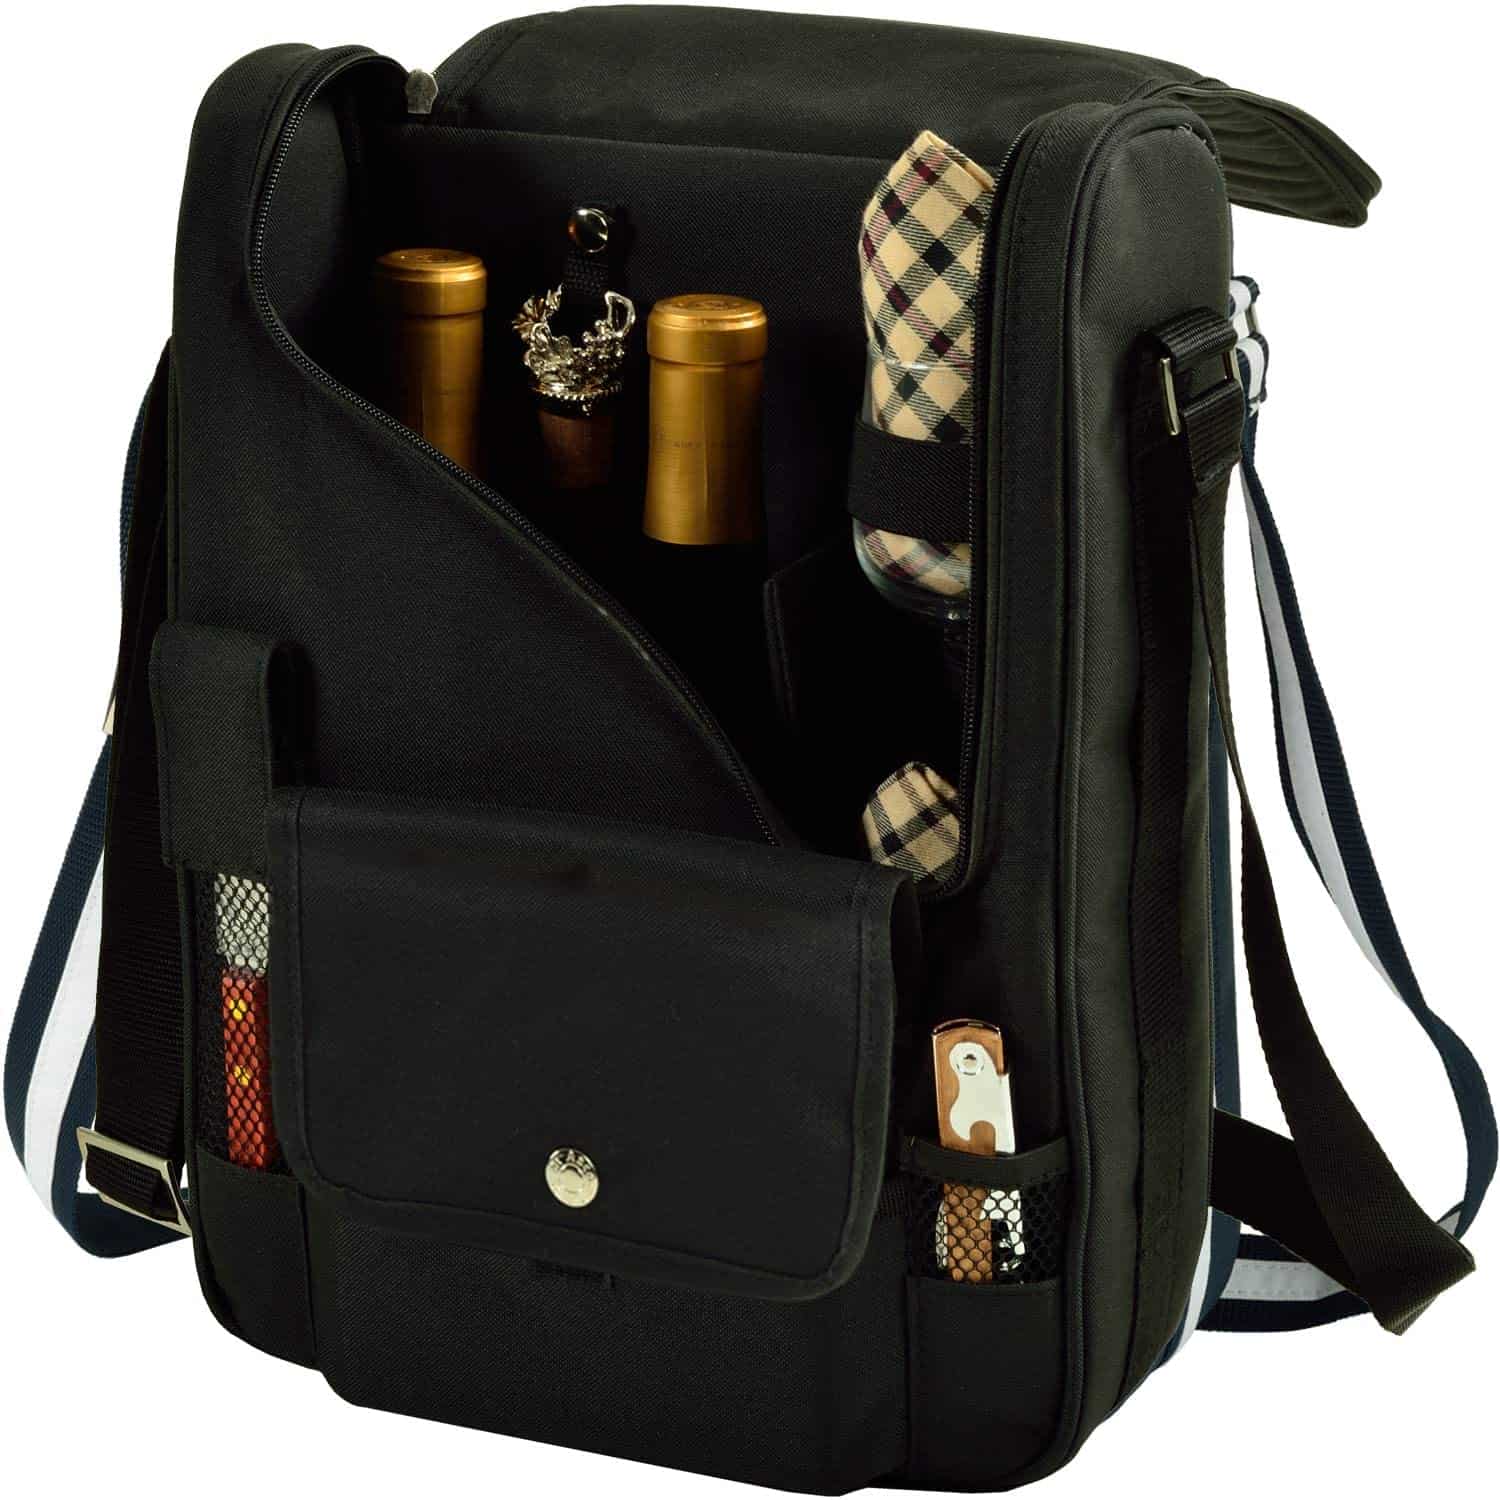 Picnic at Ascot - Wine Carrier Deluxe